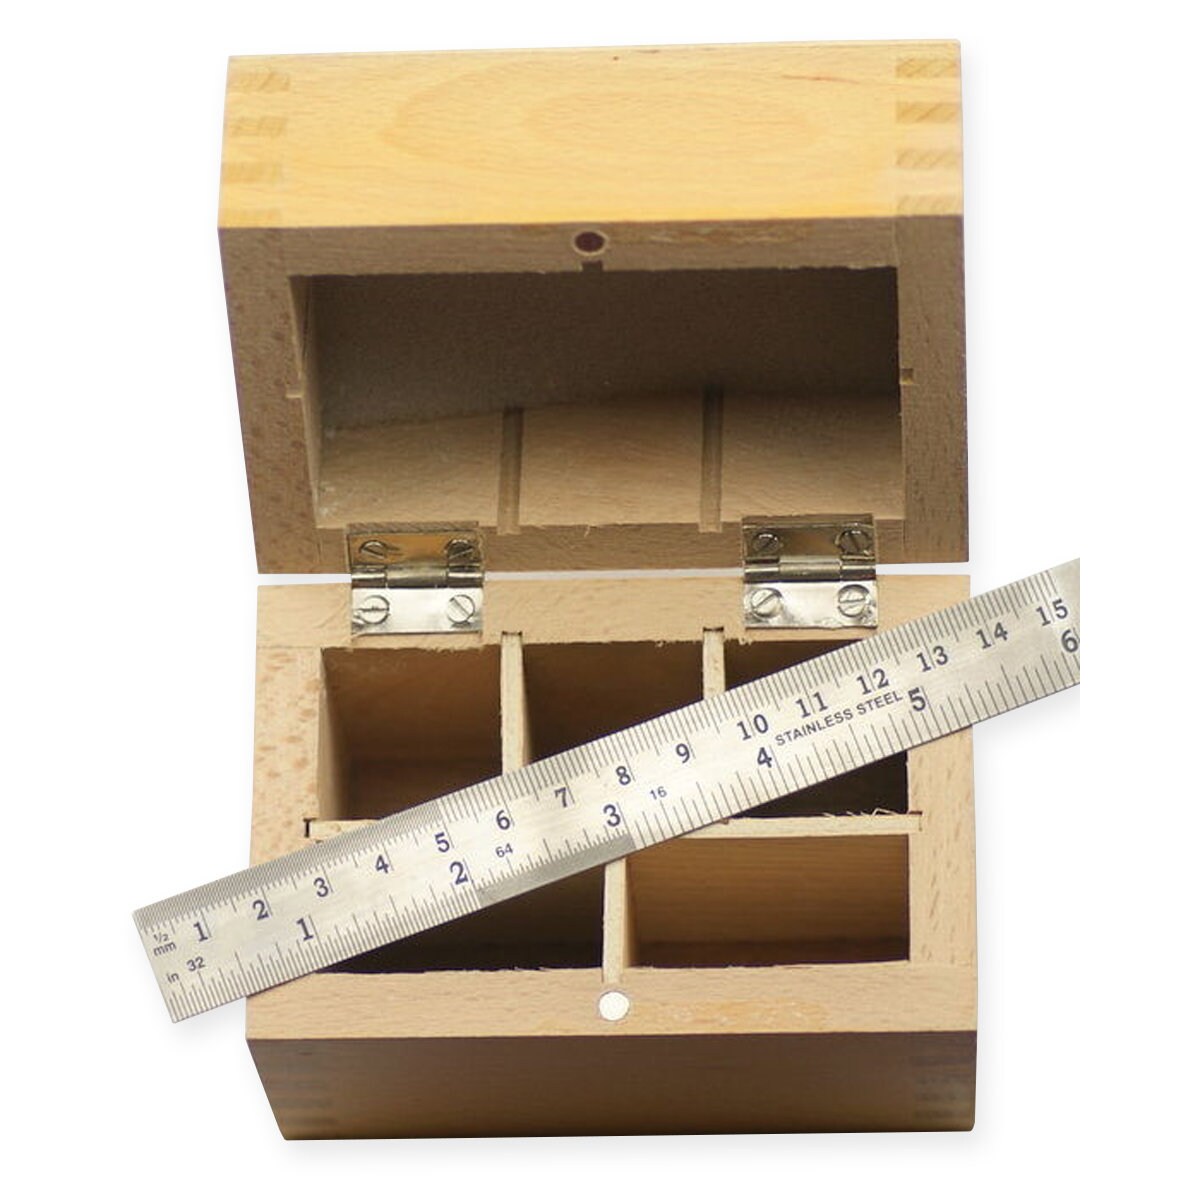 9 PACK GOLD & SILVER TESTING , gold test, stone, wooden stand, Box